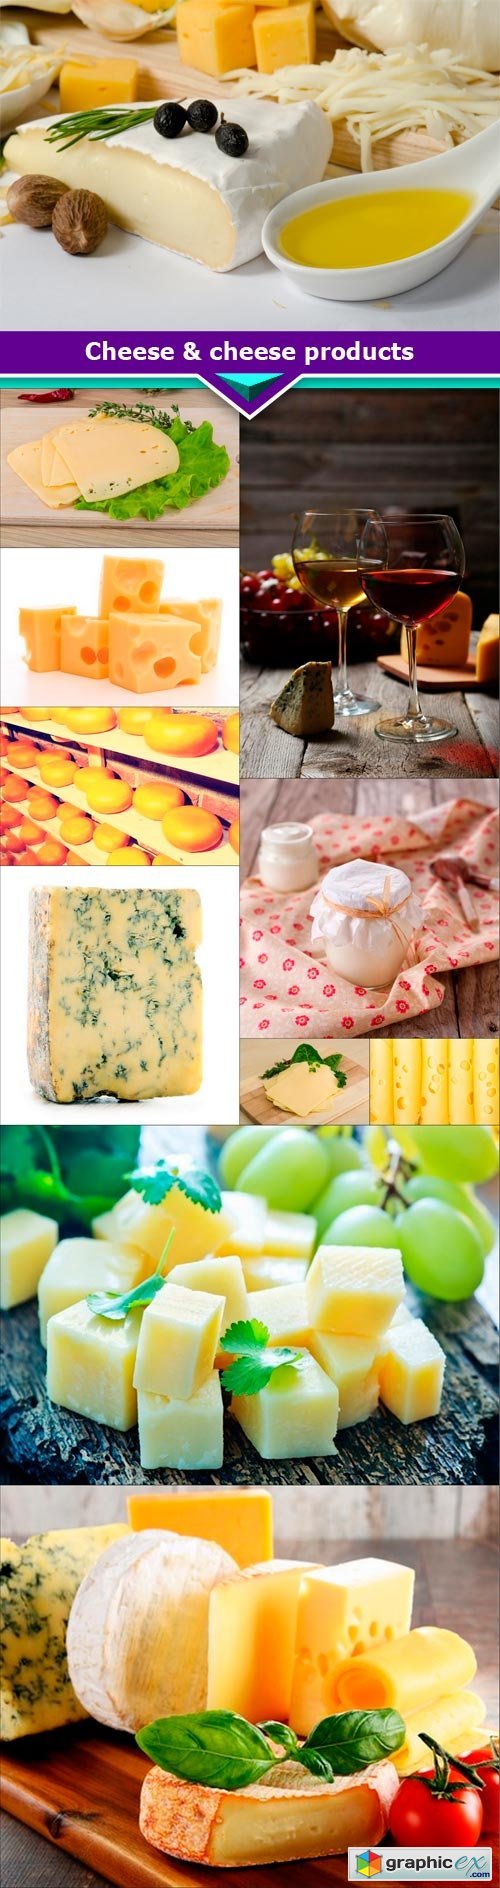 Cheese & cheese products 11x JPEG